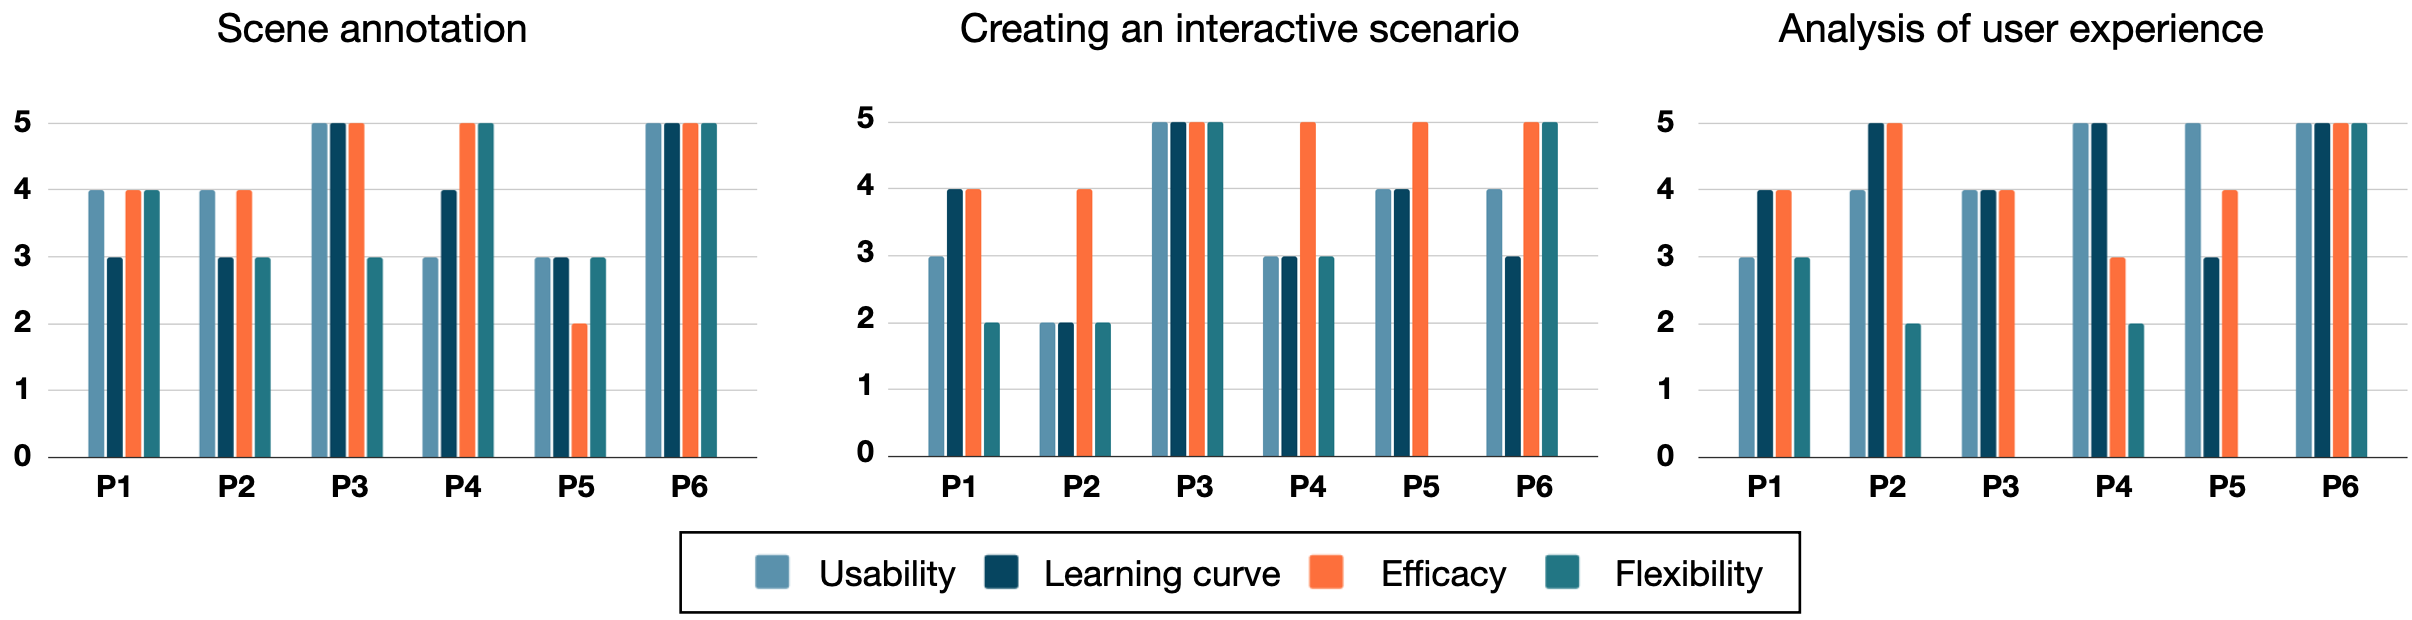 The figure shows three bar graphs, one for each of the three tasks “Scene Annotation”, “Creating an interactive scenario”, and “Analysis of user experience”. Four colors for bars represent the metrics of usability, learning cureve, efficacy, and flexibility. Each bar graph shows how the six users rank the metric on the task.